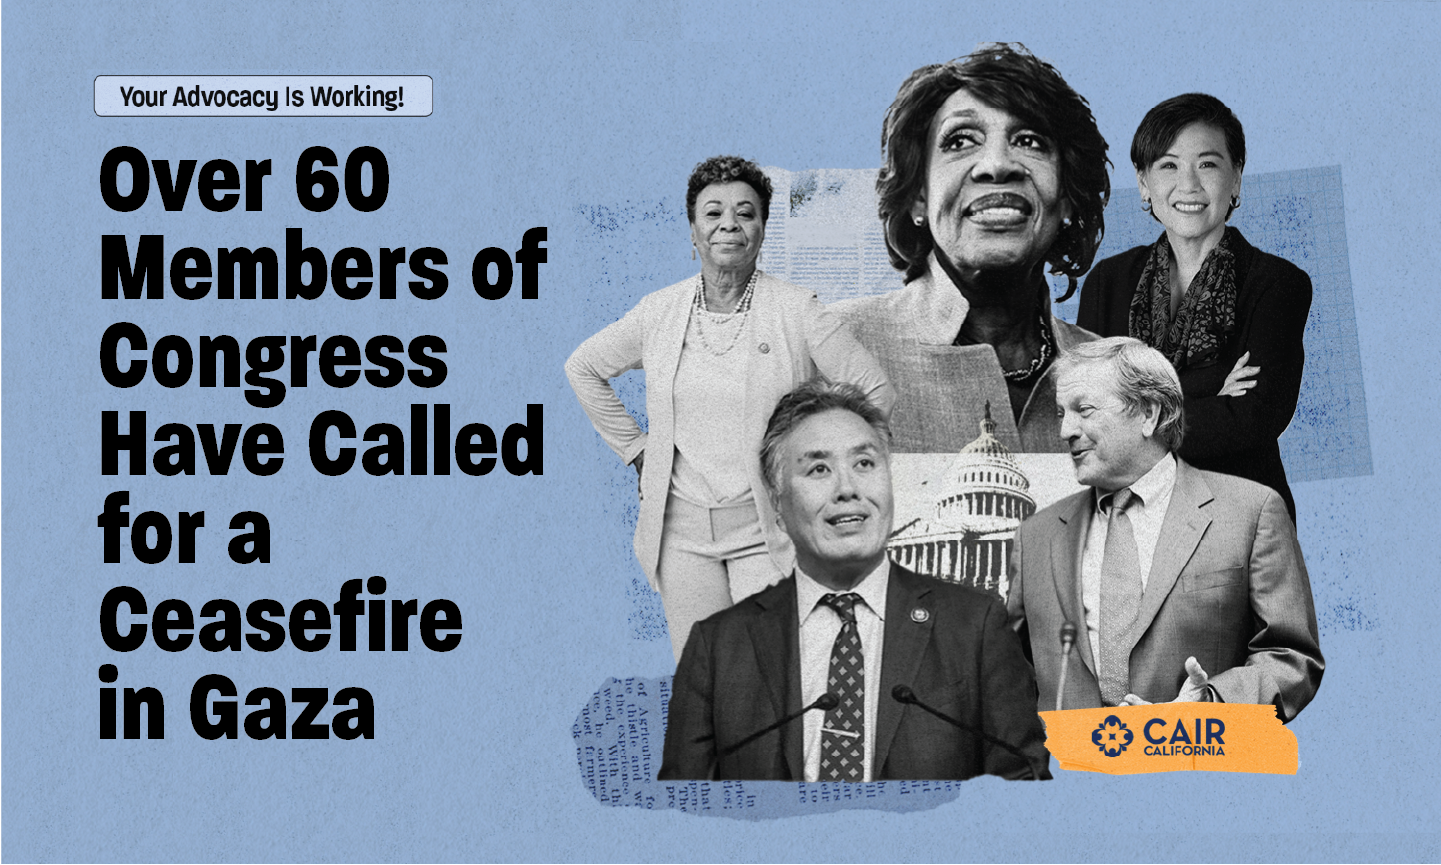 Over 60 Members of Congress Have Called for a Ceasefire in Gaza